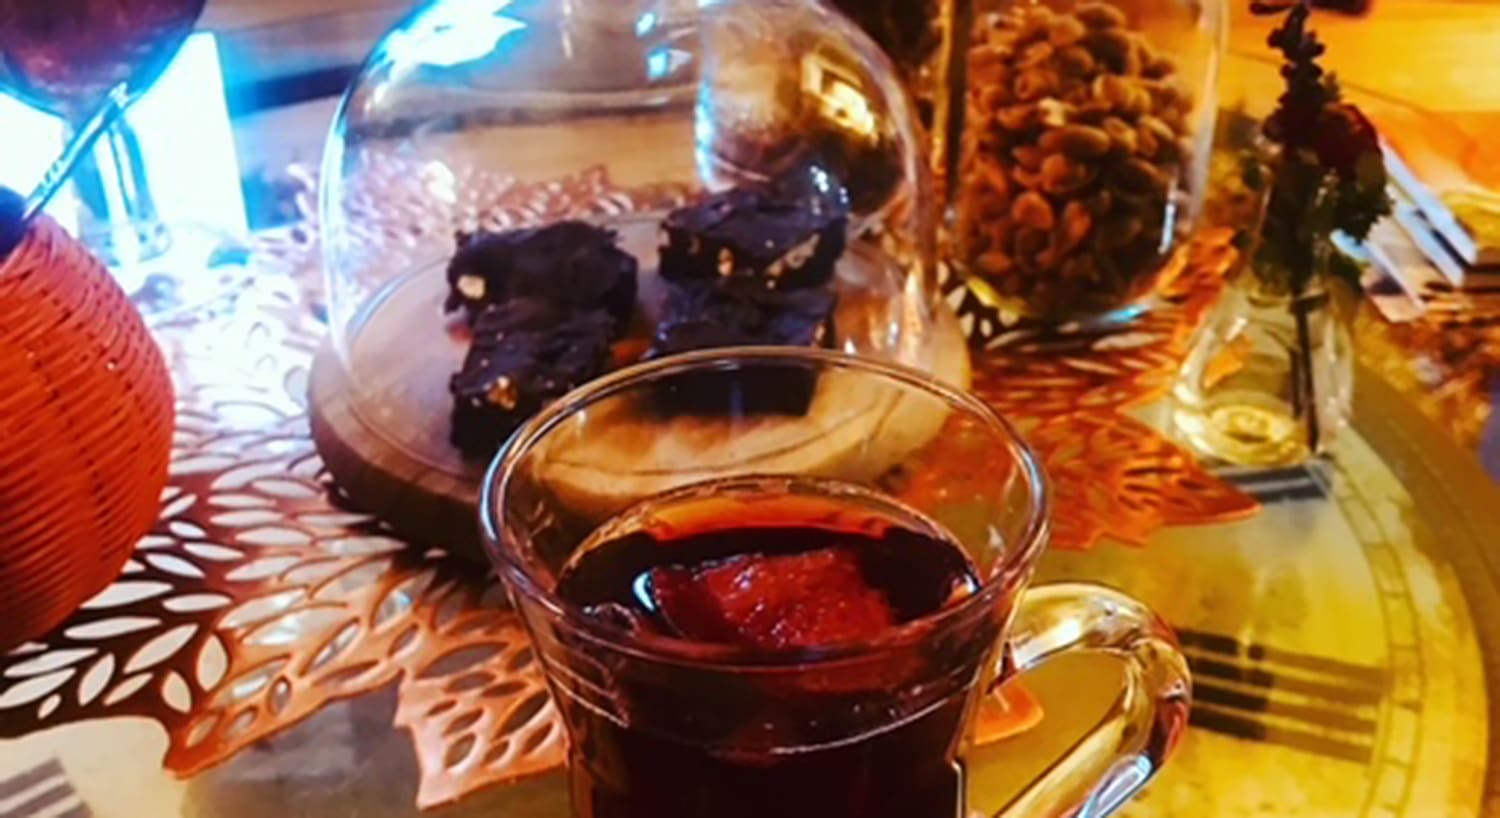 A glass of mulled cider and jars of baked treats